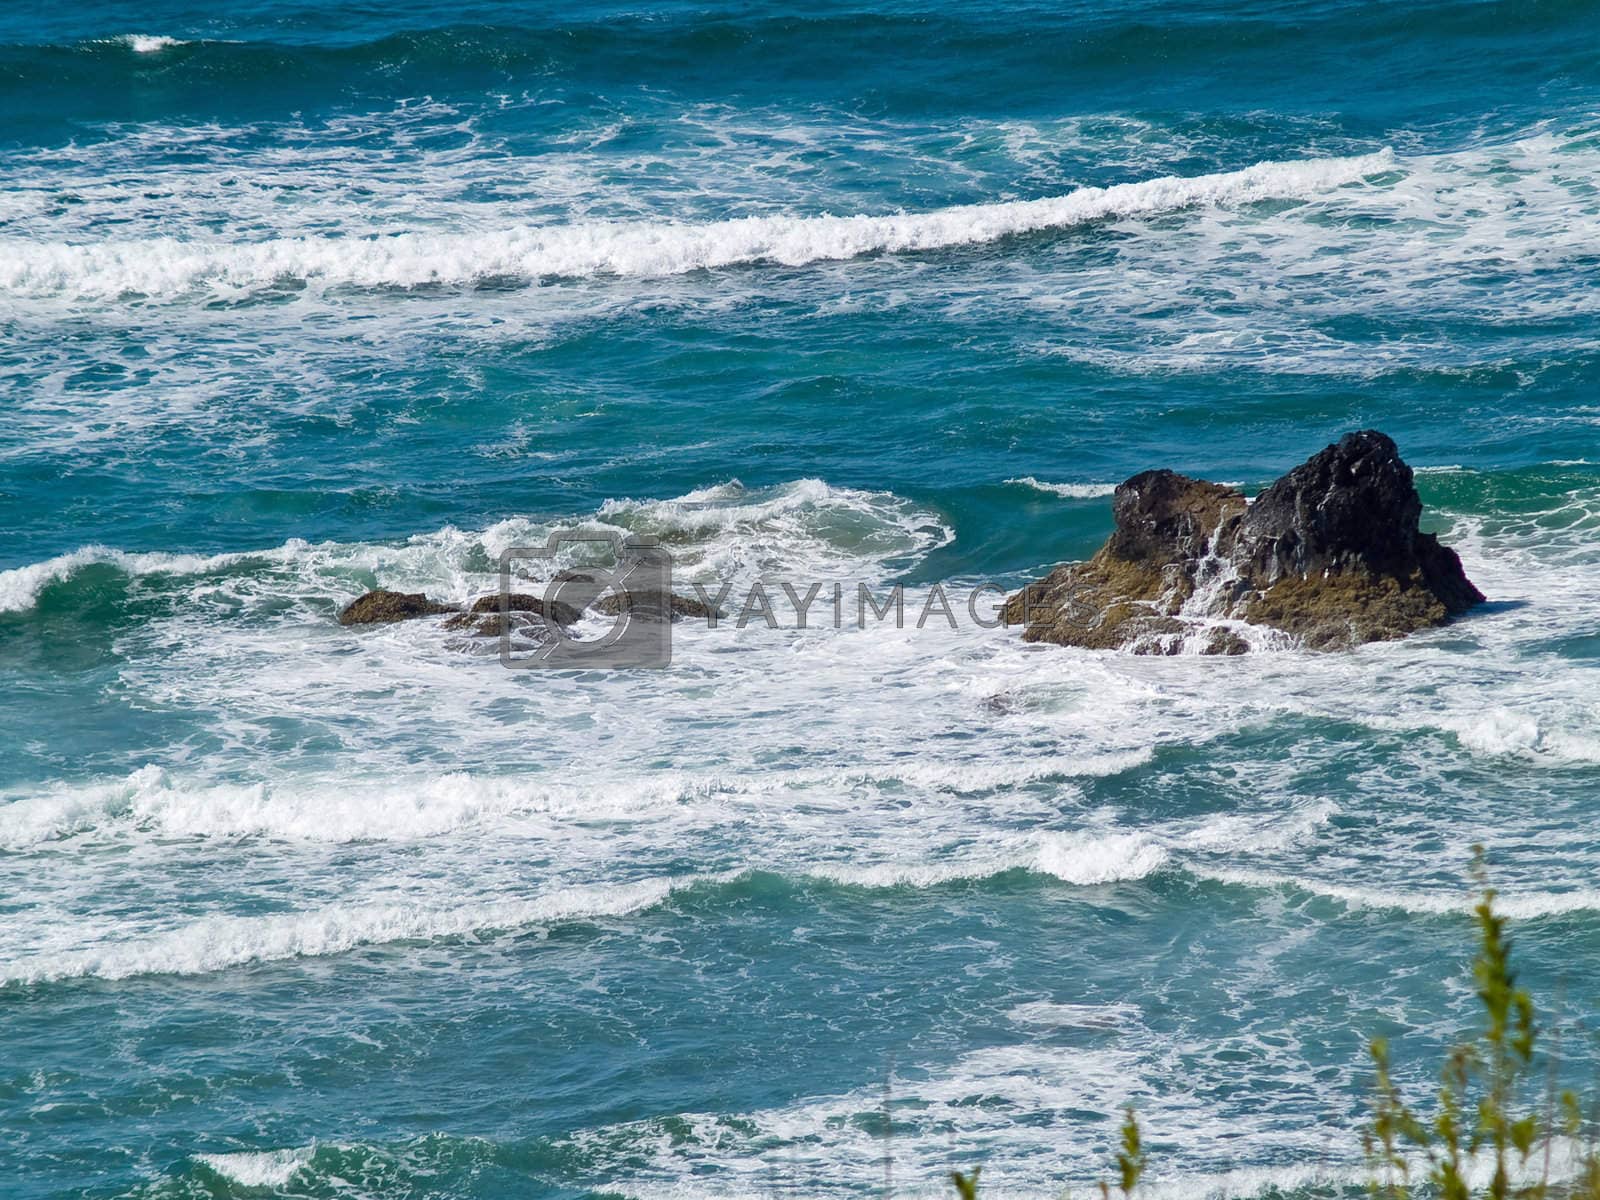 Royalty free image of Boulder on the Shore with Waves Crashing by Frankljunior